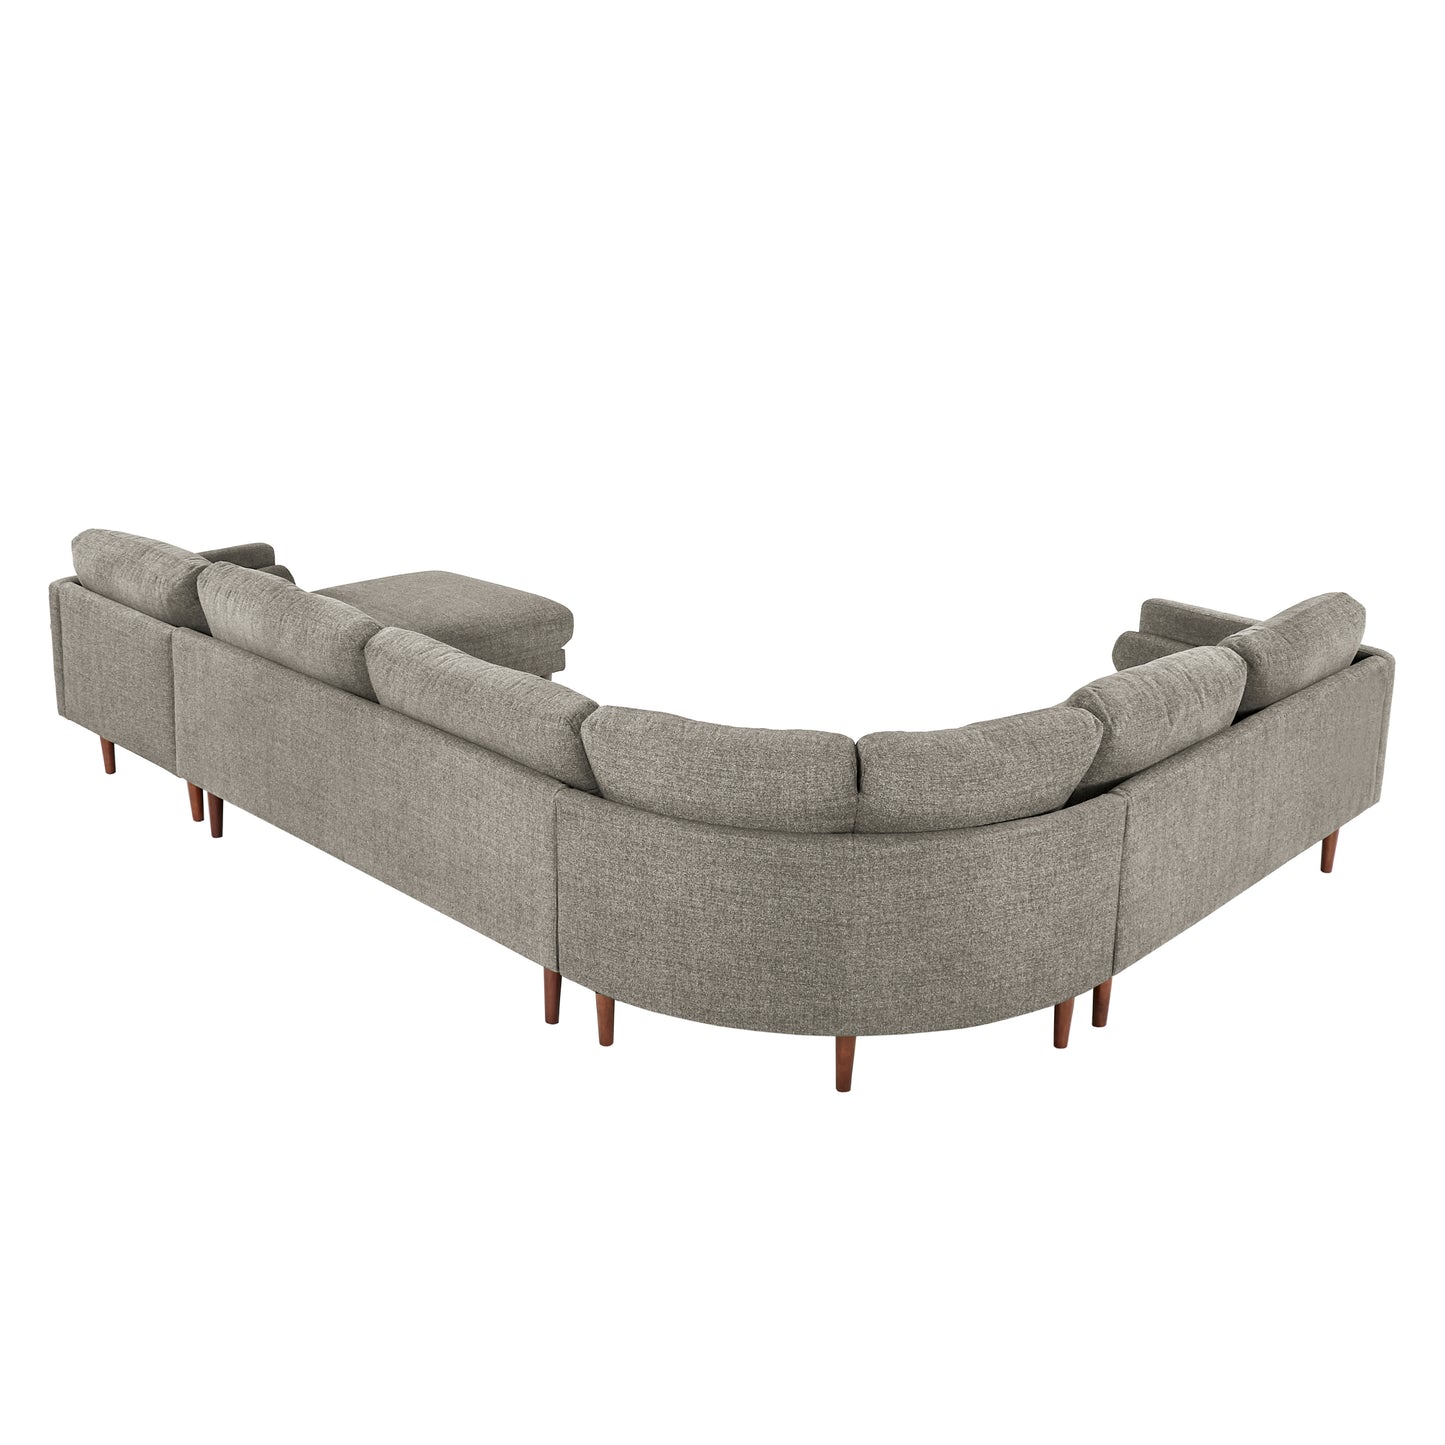 Mid-Century Upholstered Sectional Sofa - Light Grey, 7-Seat, U-Shape Sectional with Right-Facing Chaise